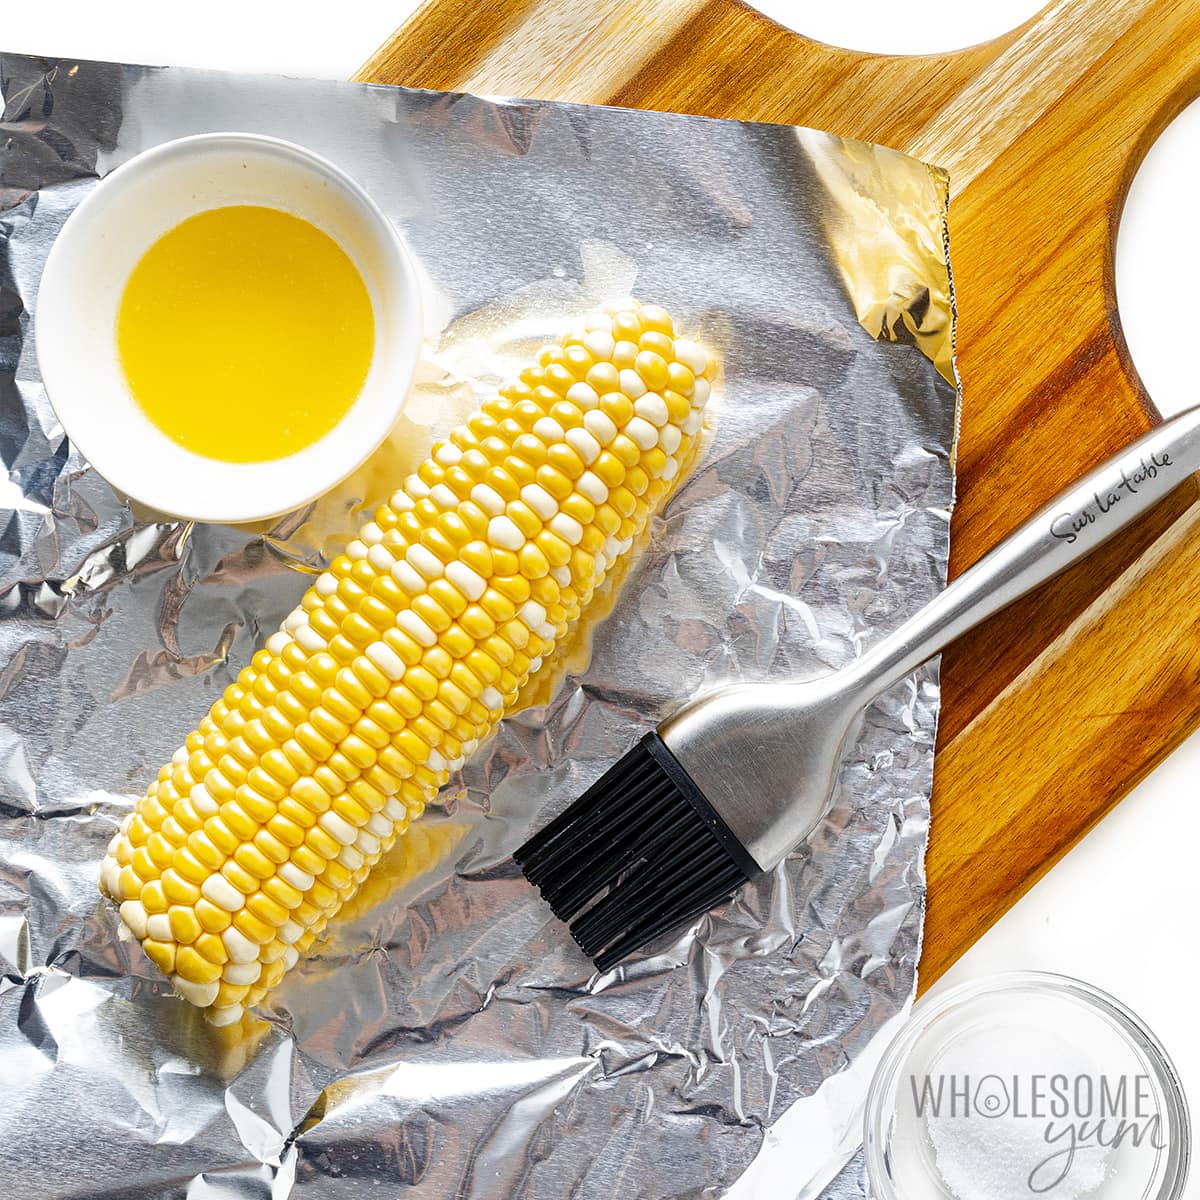 Corn on the cob next to melted butter and brush on aluminum foil.